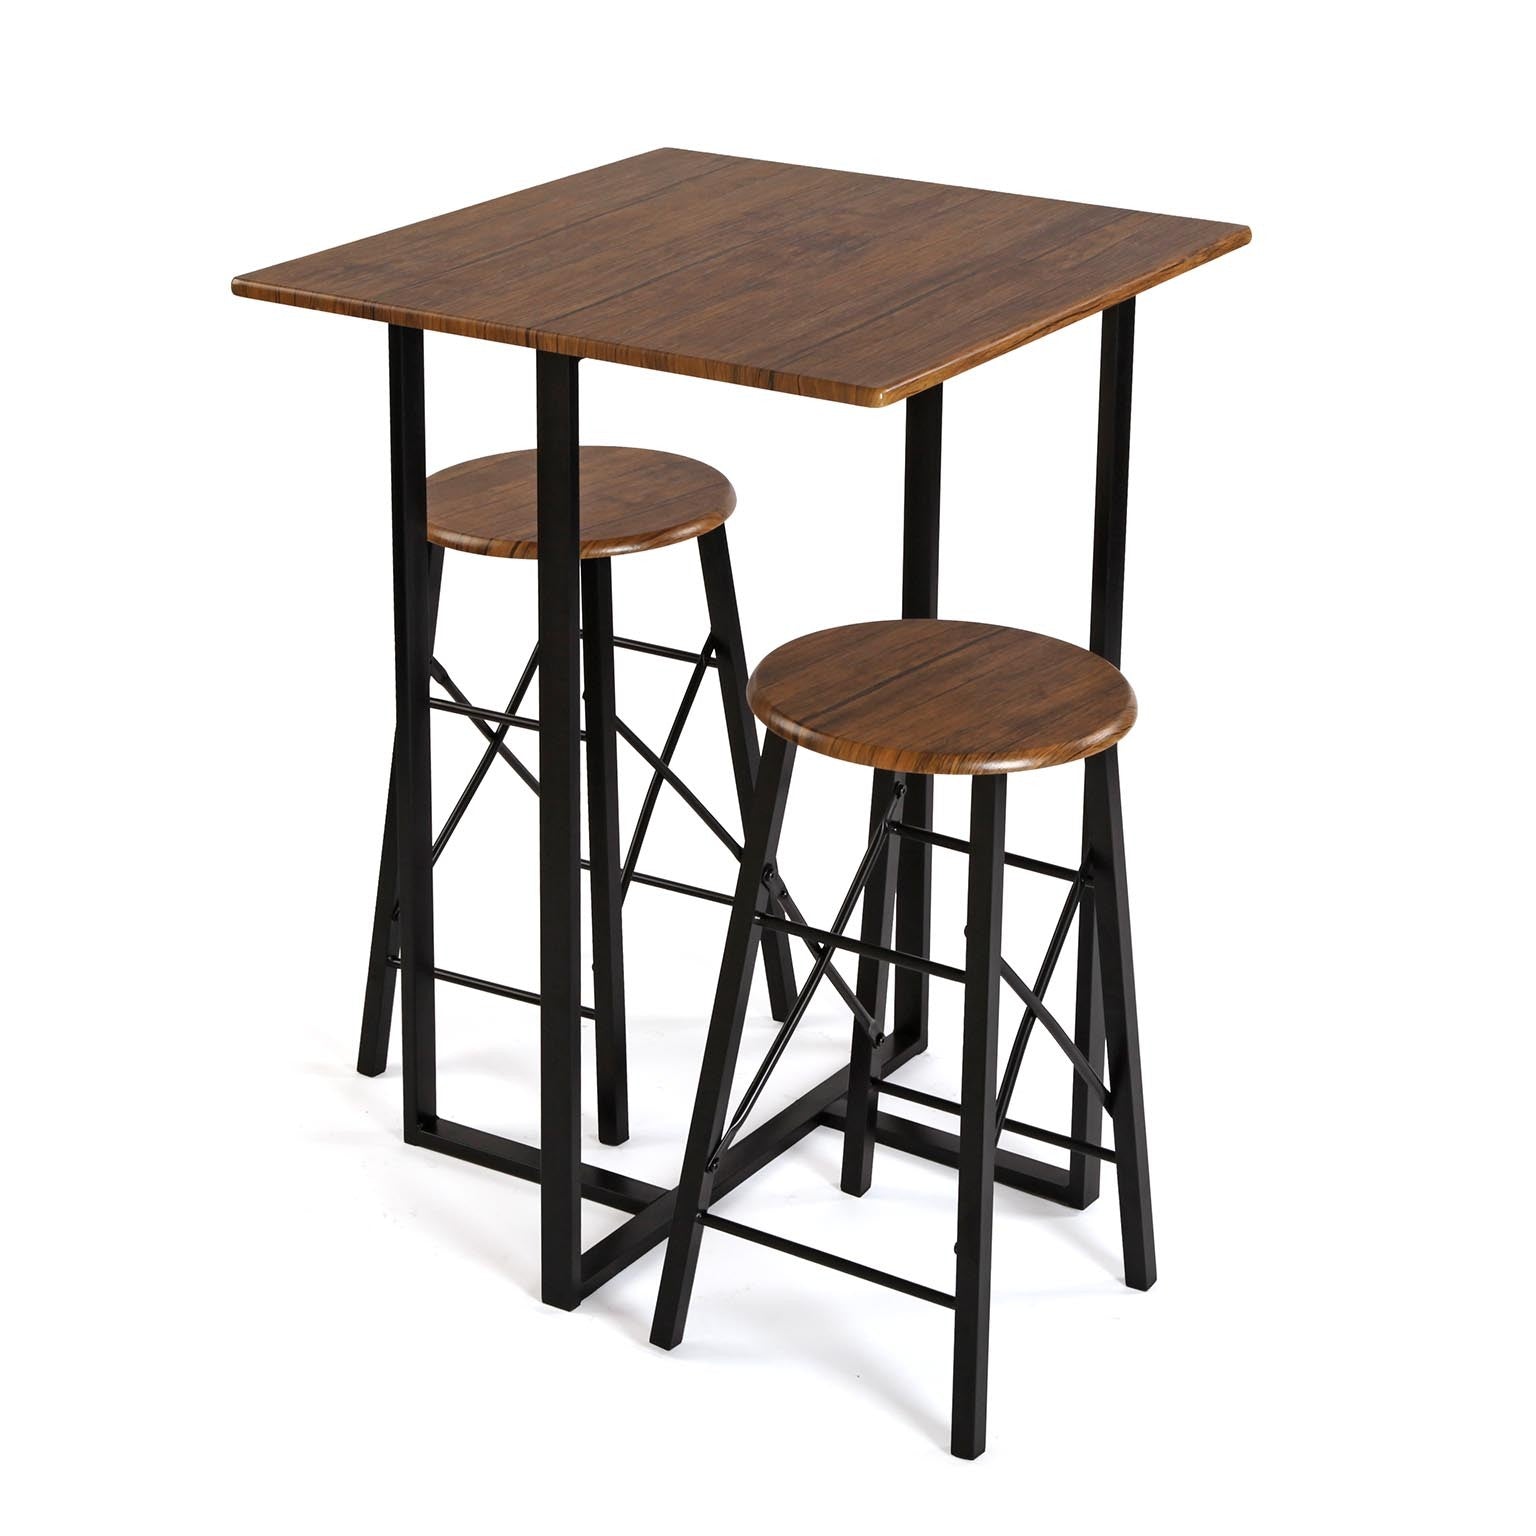 Loft Design Bar Table and 2 Stools in Brown Wood and Black Metal Versa